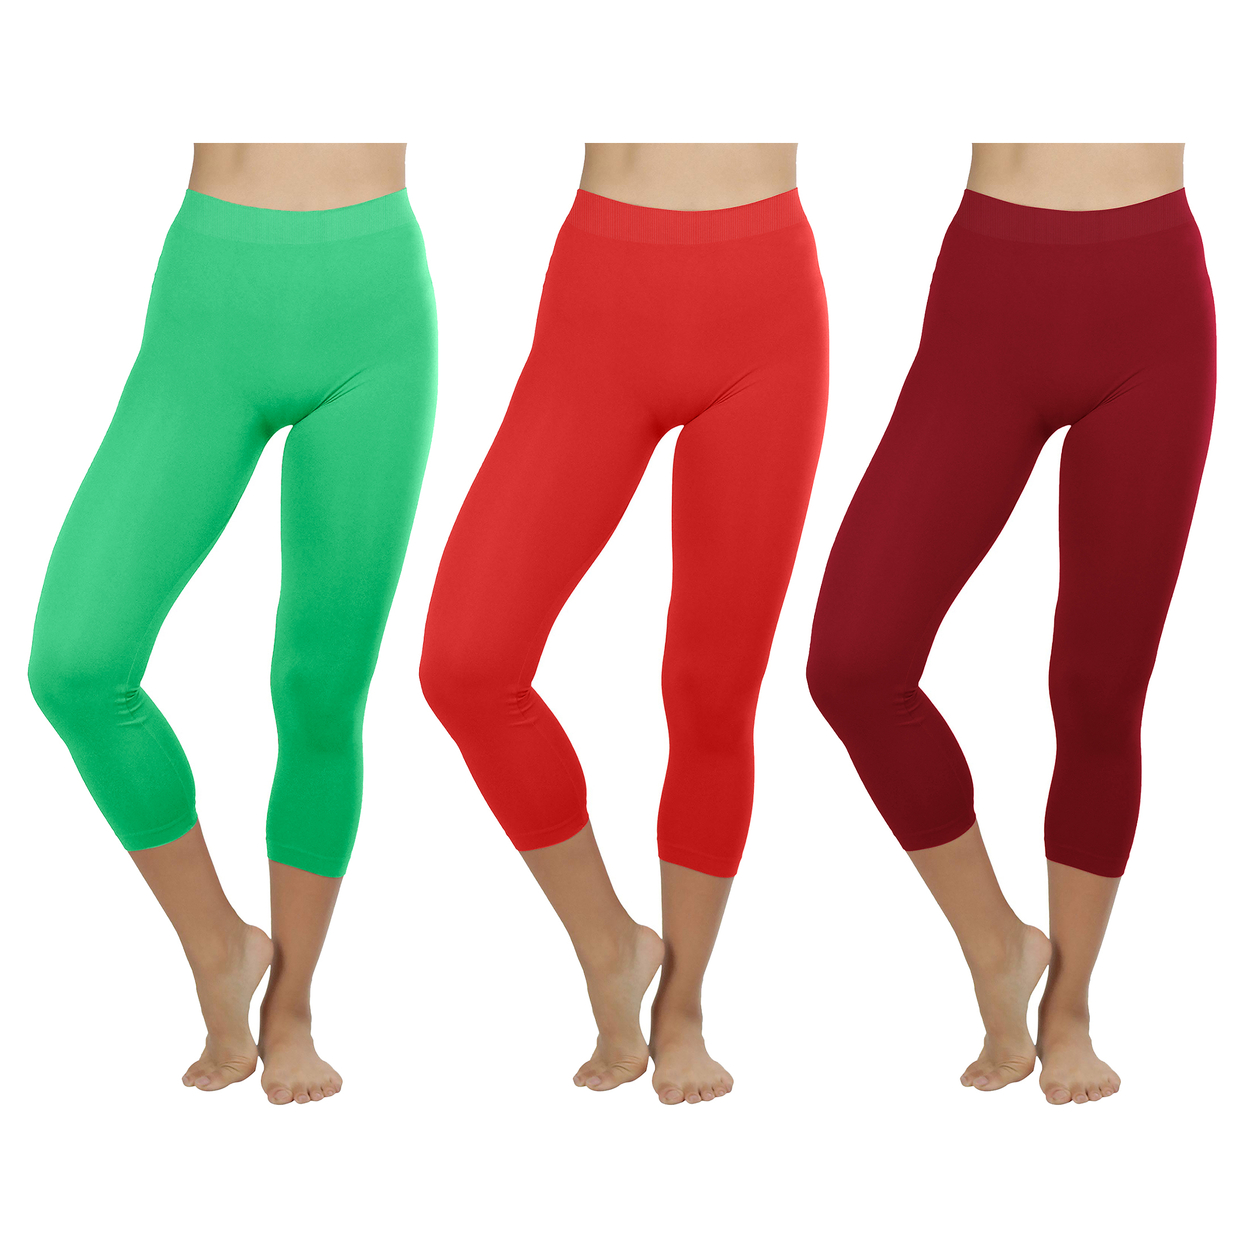 2-Pack: Women's Ultra-Soft High Waisted Smooth Stretch Active Yoga Capri Leggings - Green & Burgundy, Large